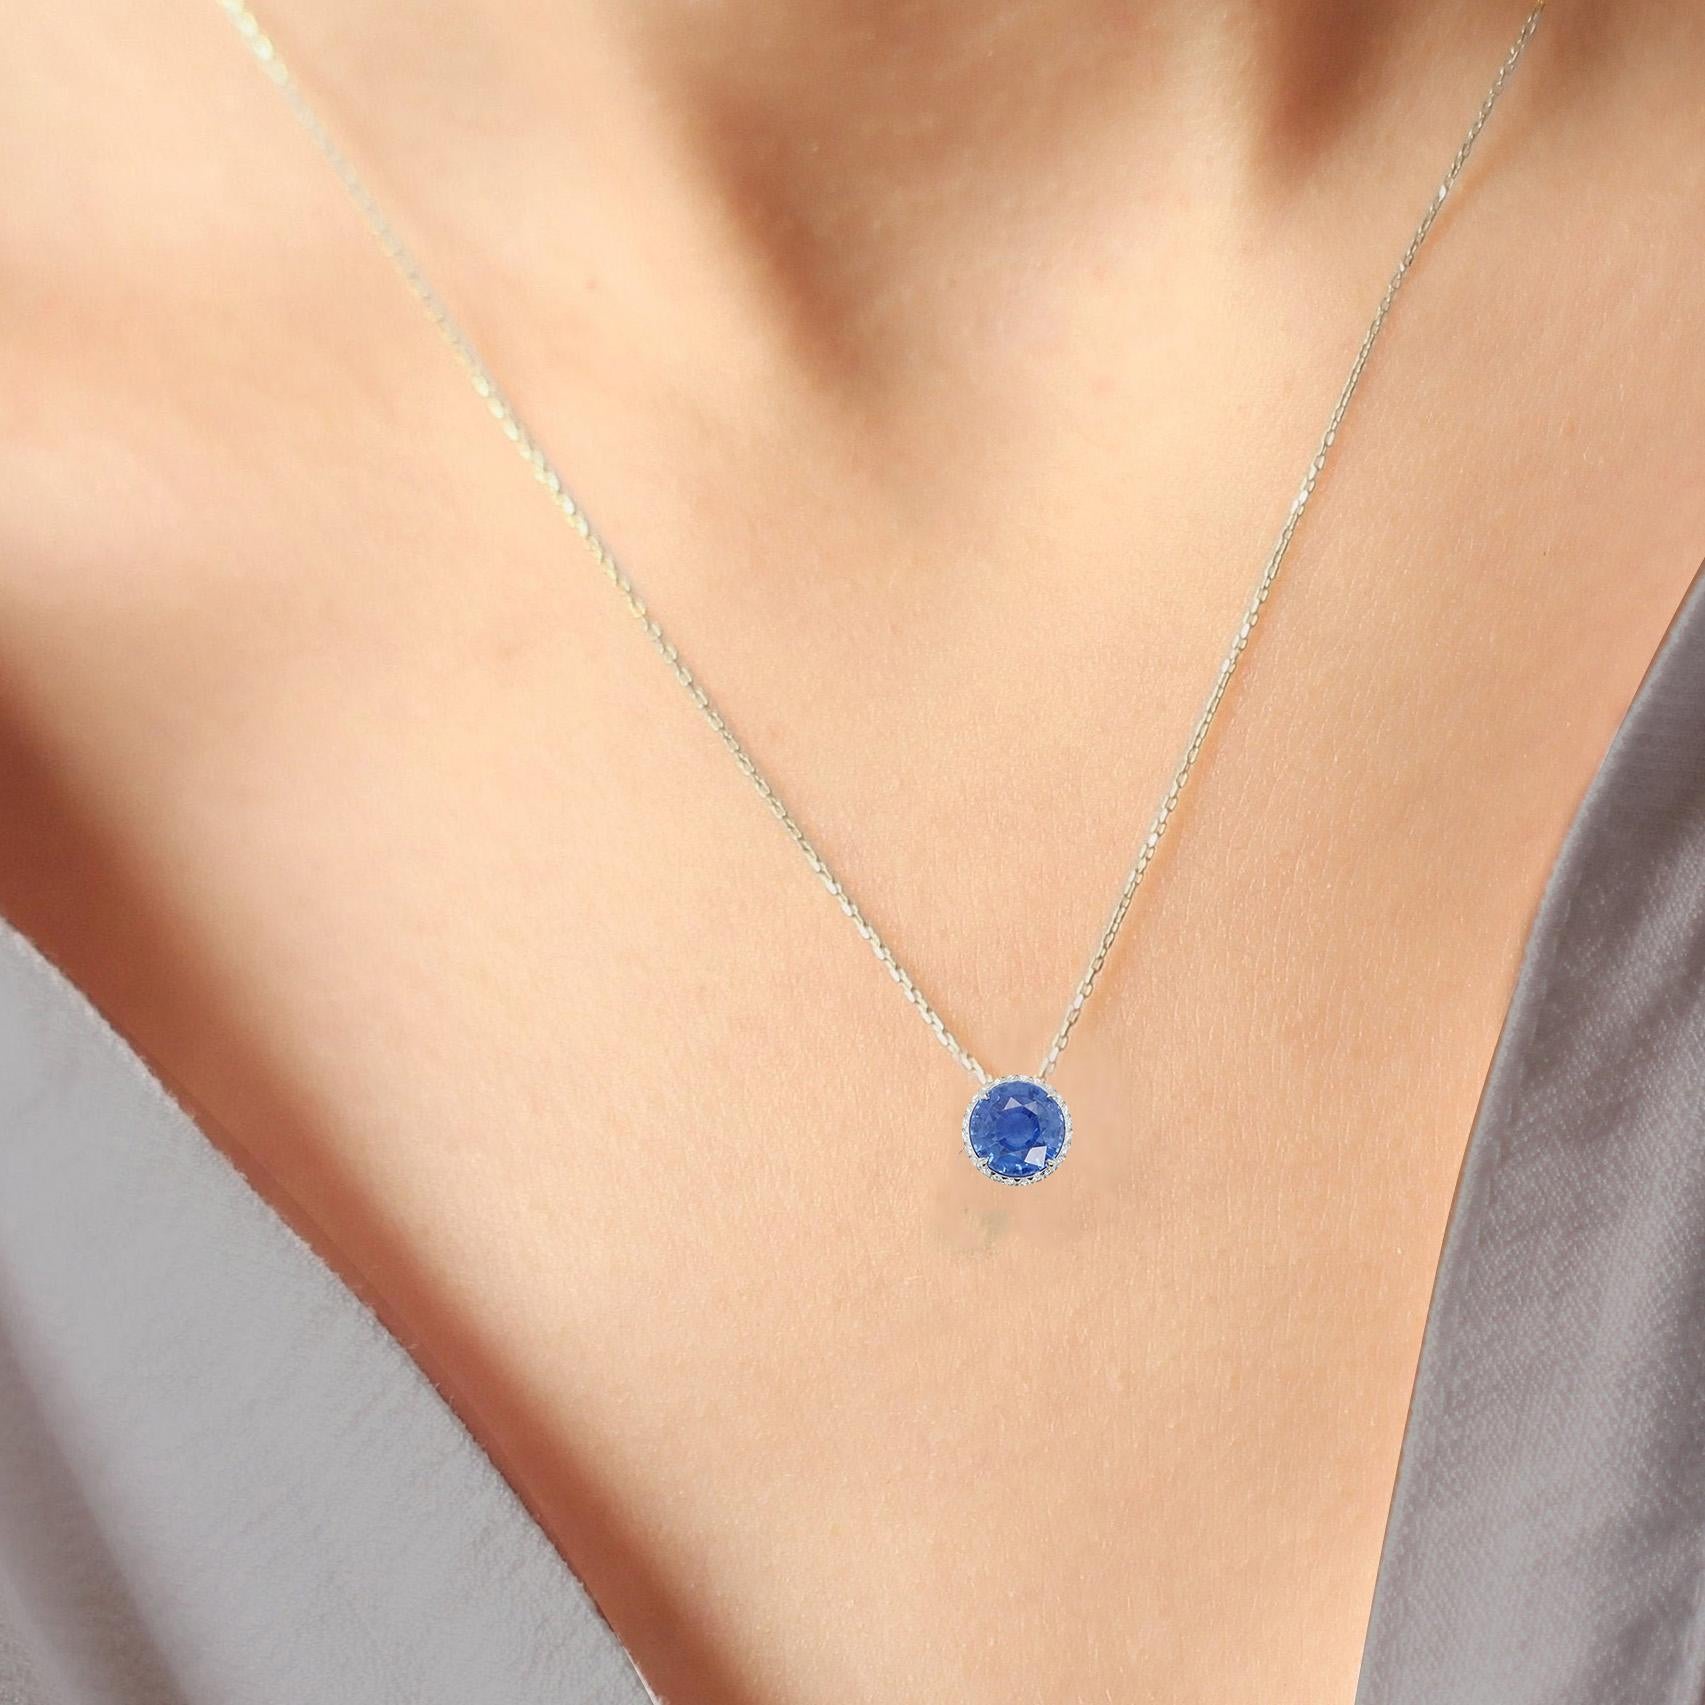 Round Cut 18K White Gold Necklace With Sapphire 3.04 ct. For Sale